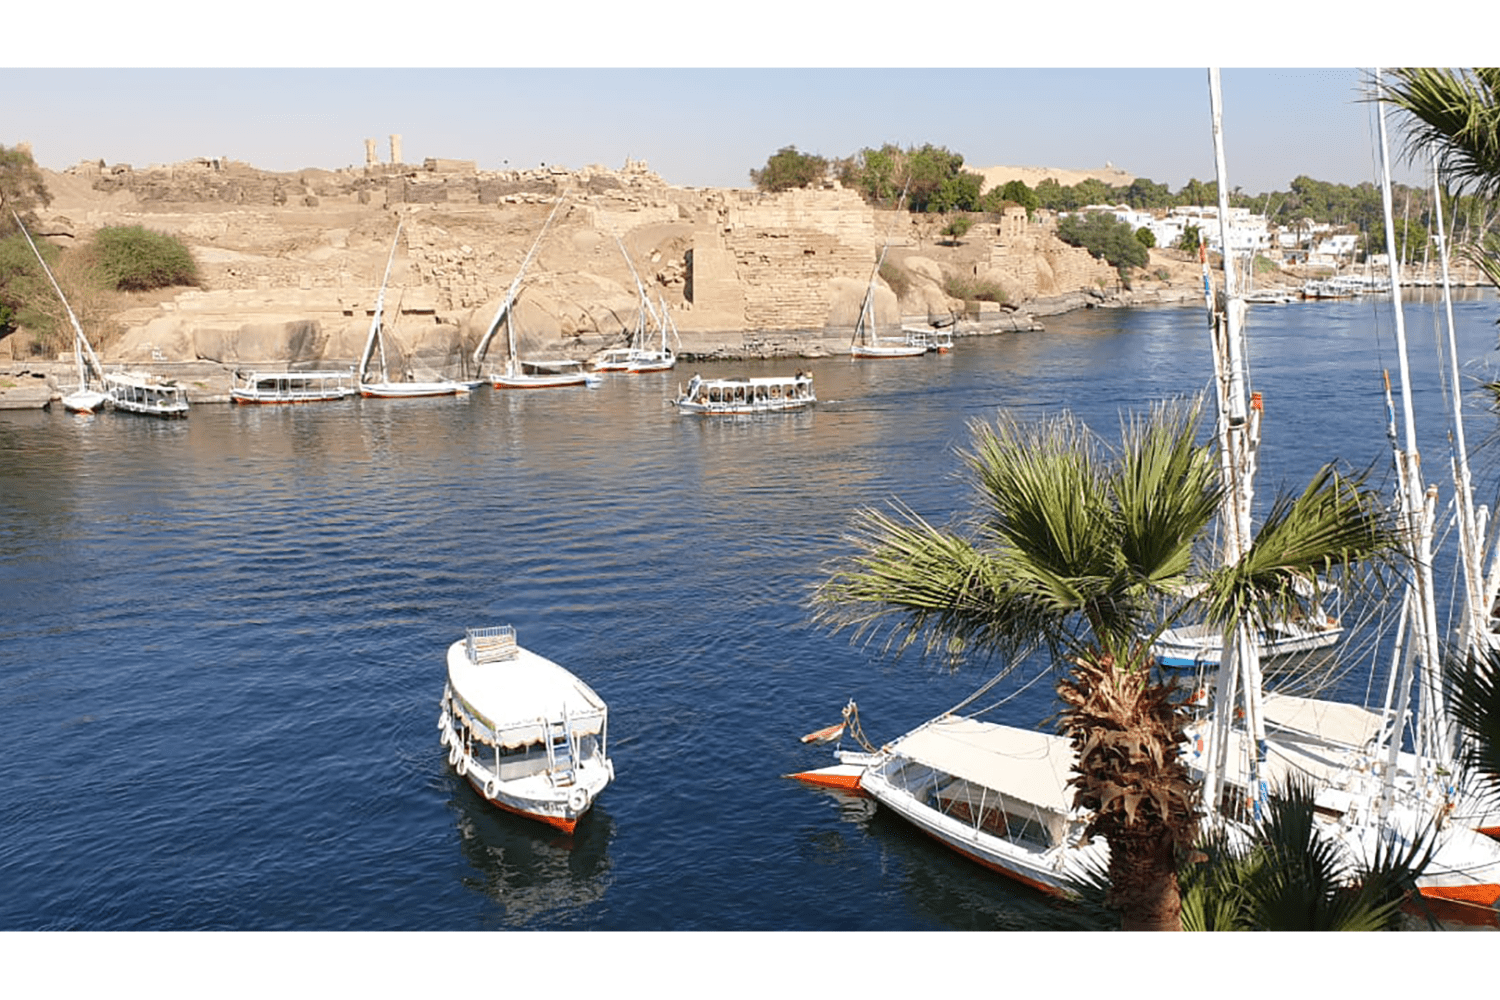 Sofitel Legend Old Cataract Hotel - Aswan | Egypt In The Golden Age of Luxury Travel Tour